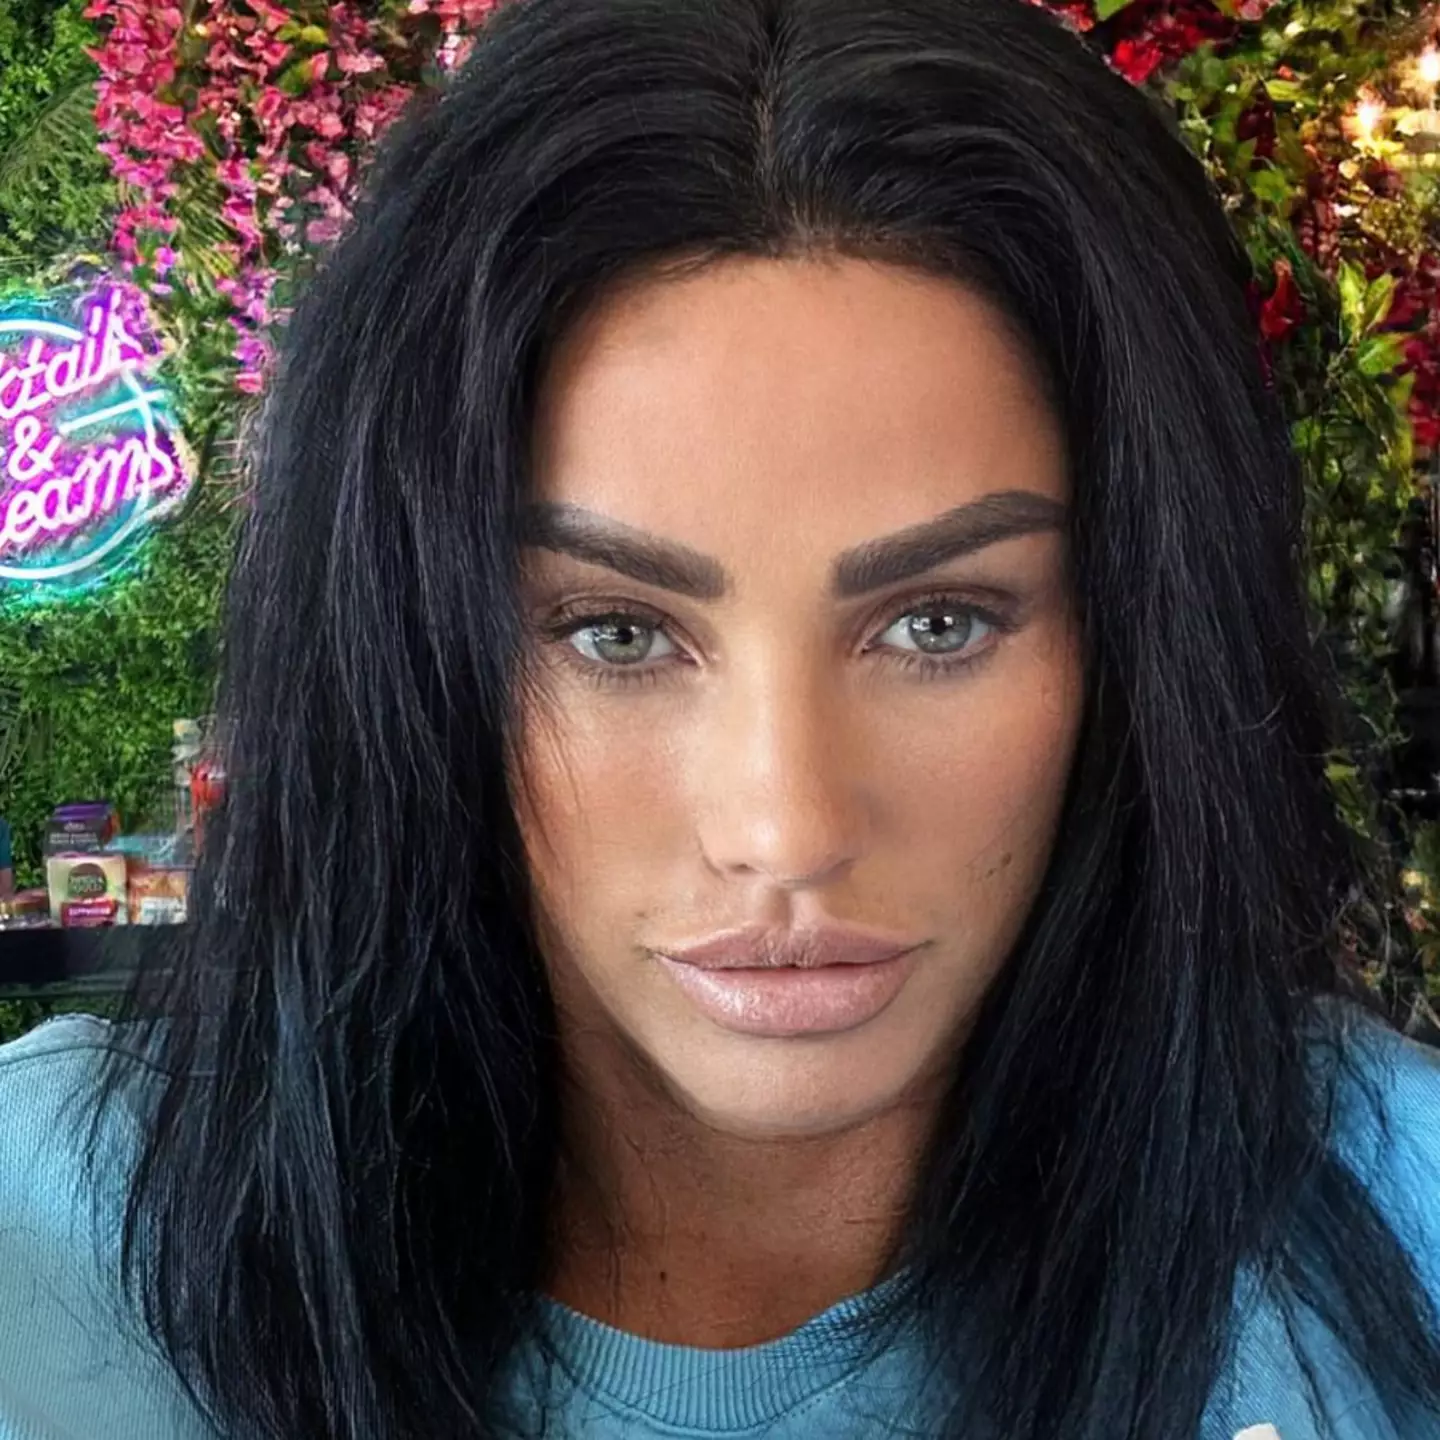 Katie Price's mum Amy discusses her life in her book.